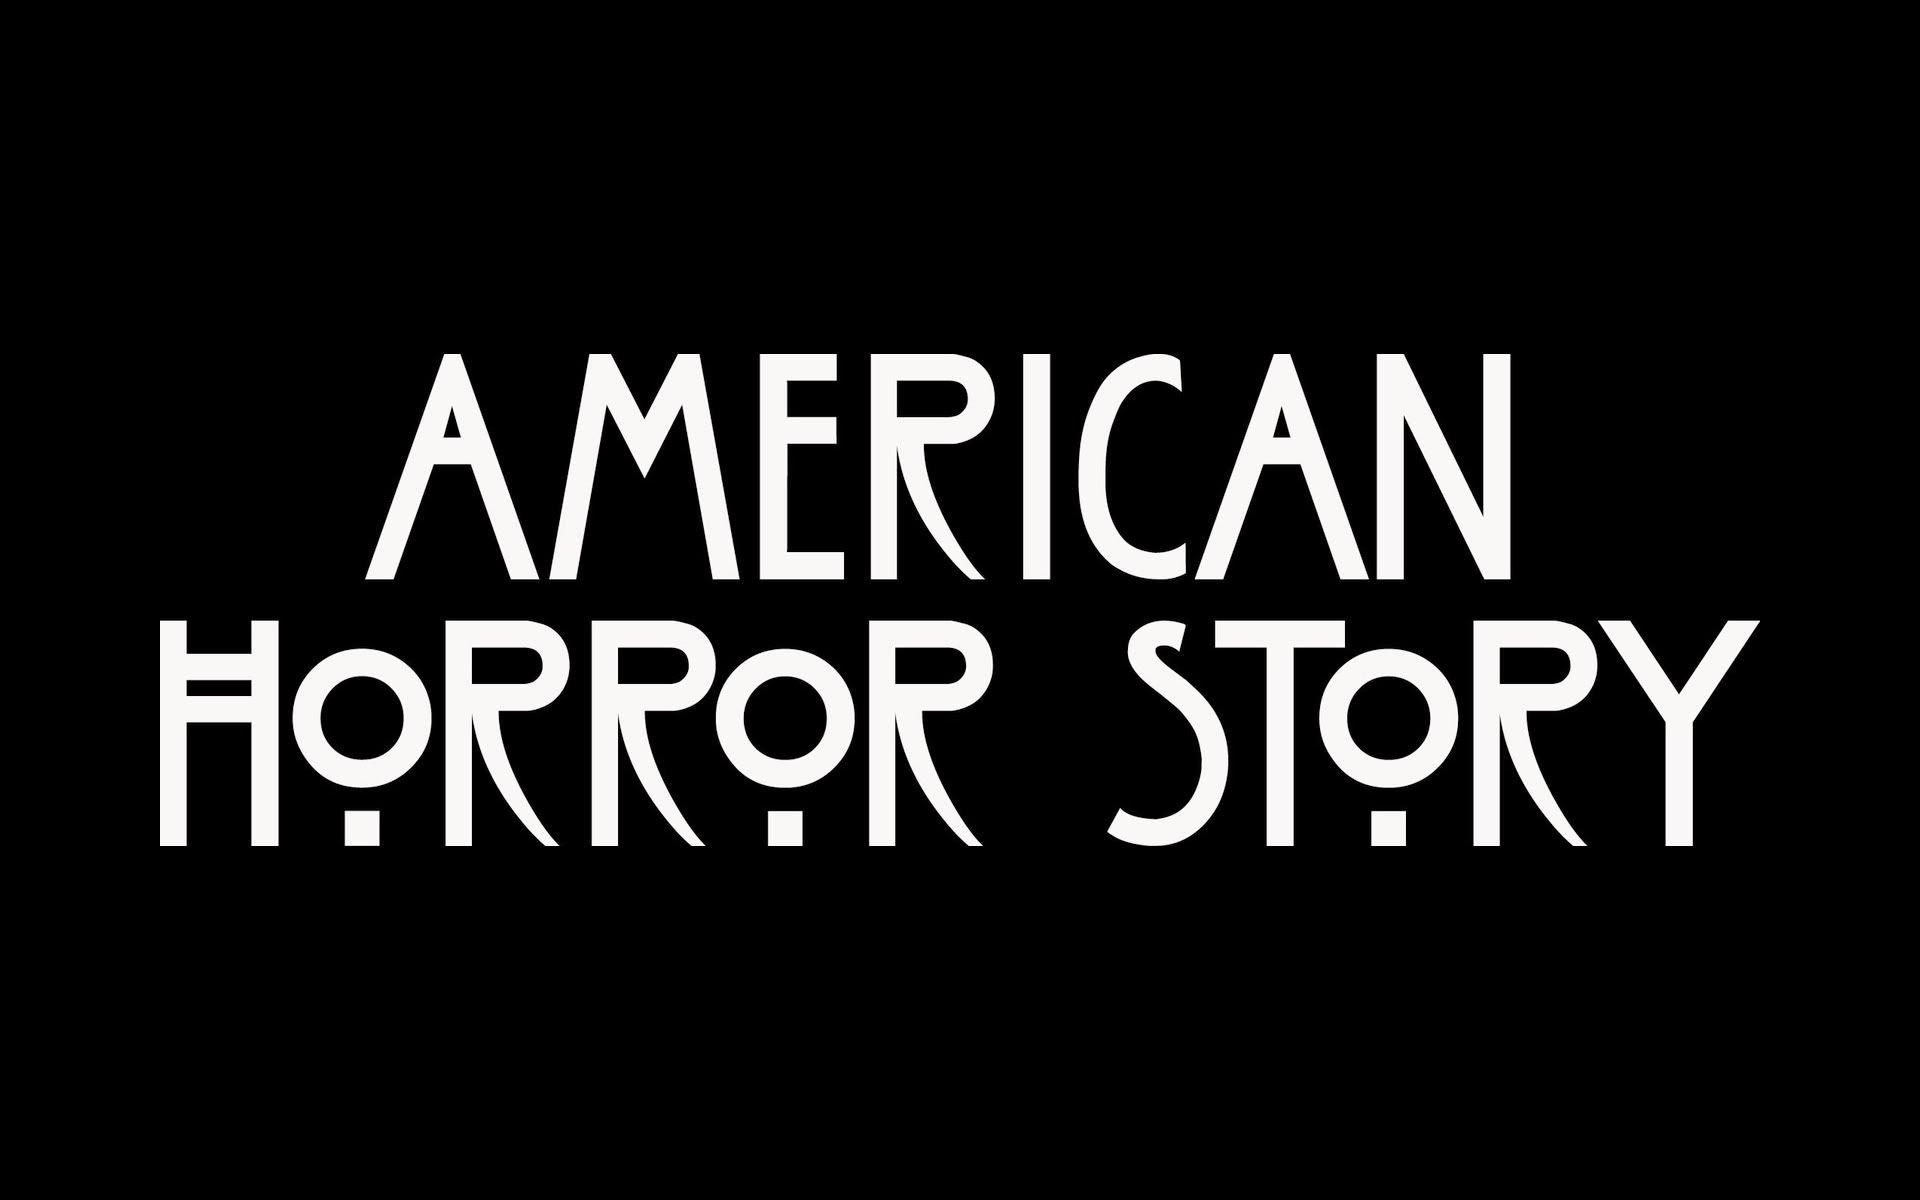 AMERICAN HORROR STORY COVERS & WALLPAPERS. AMERICAN HORROR STORY